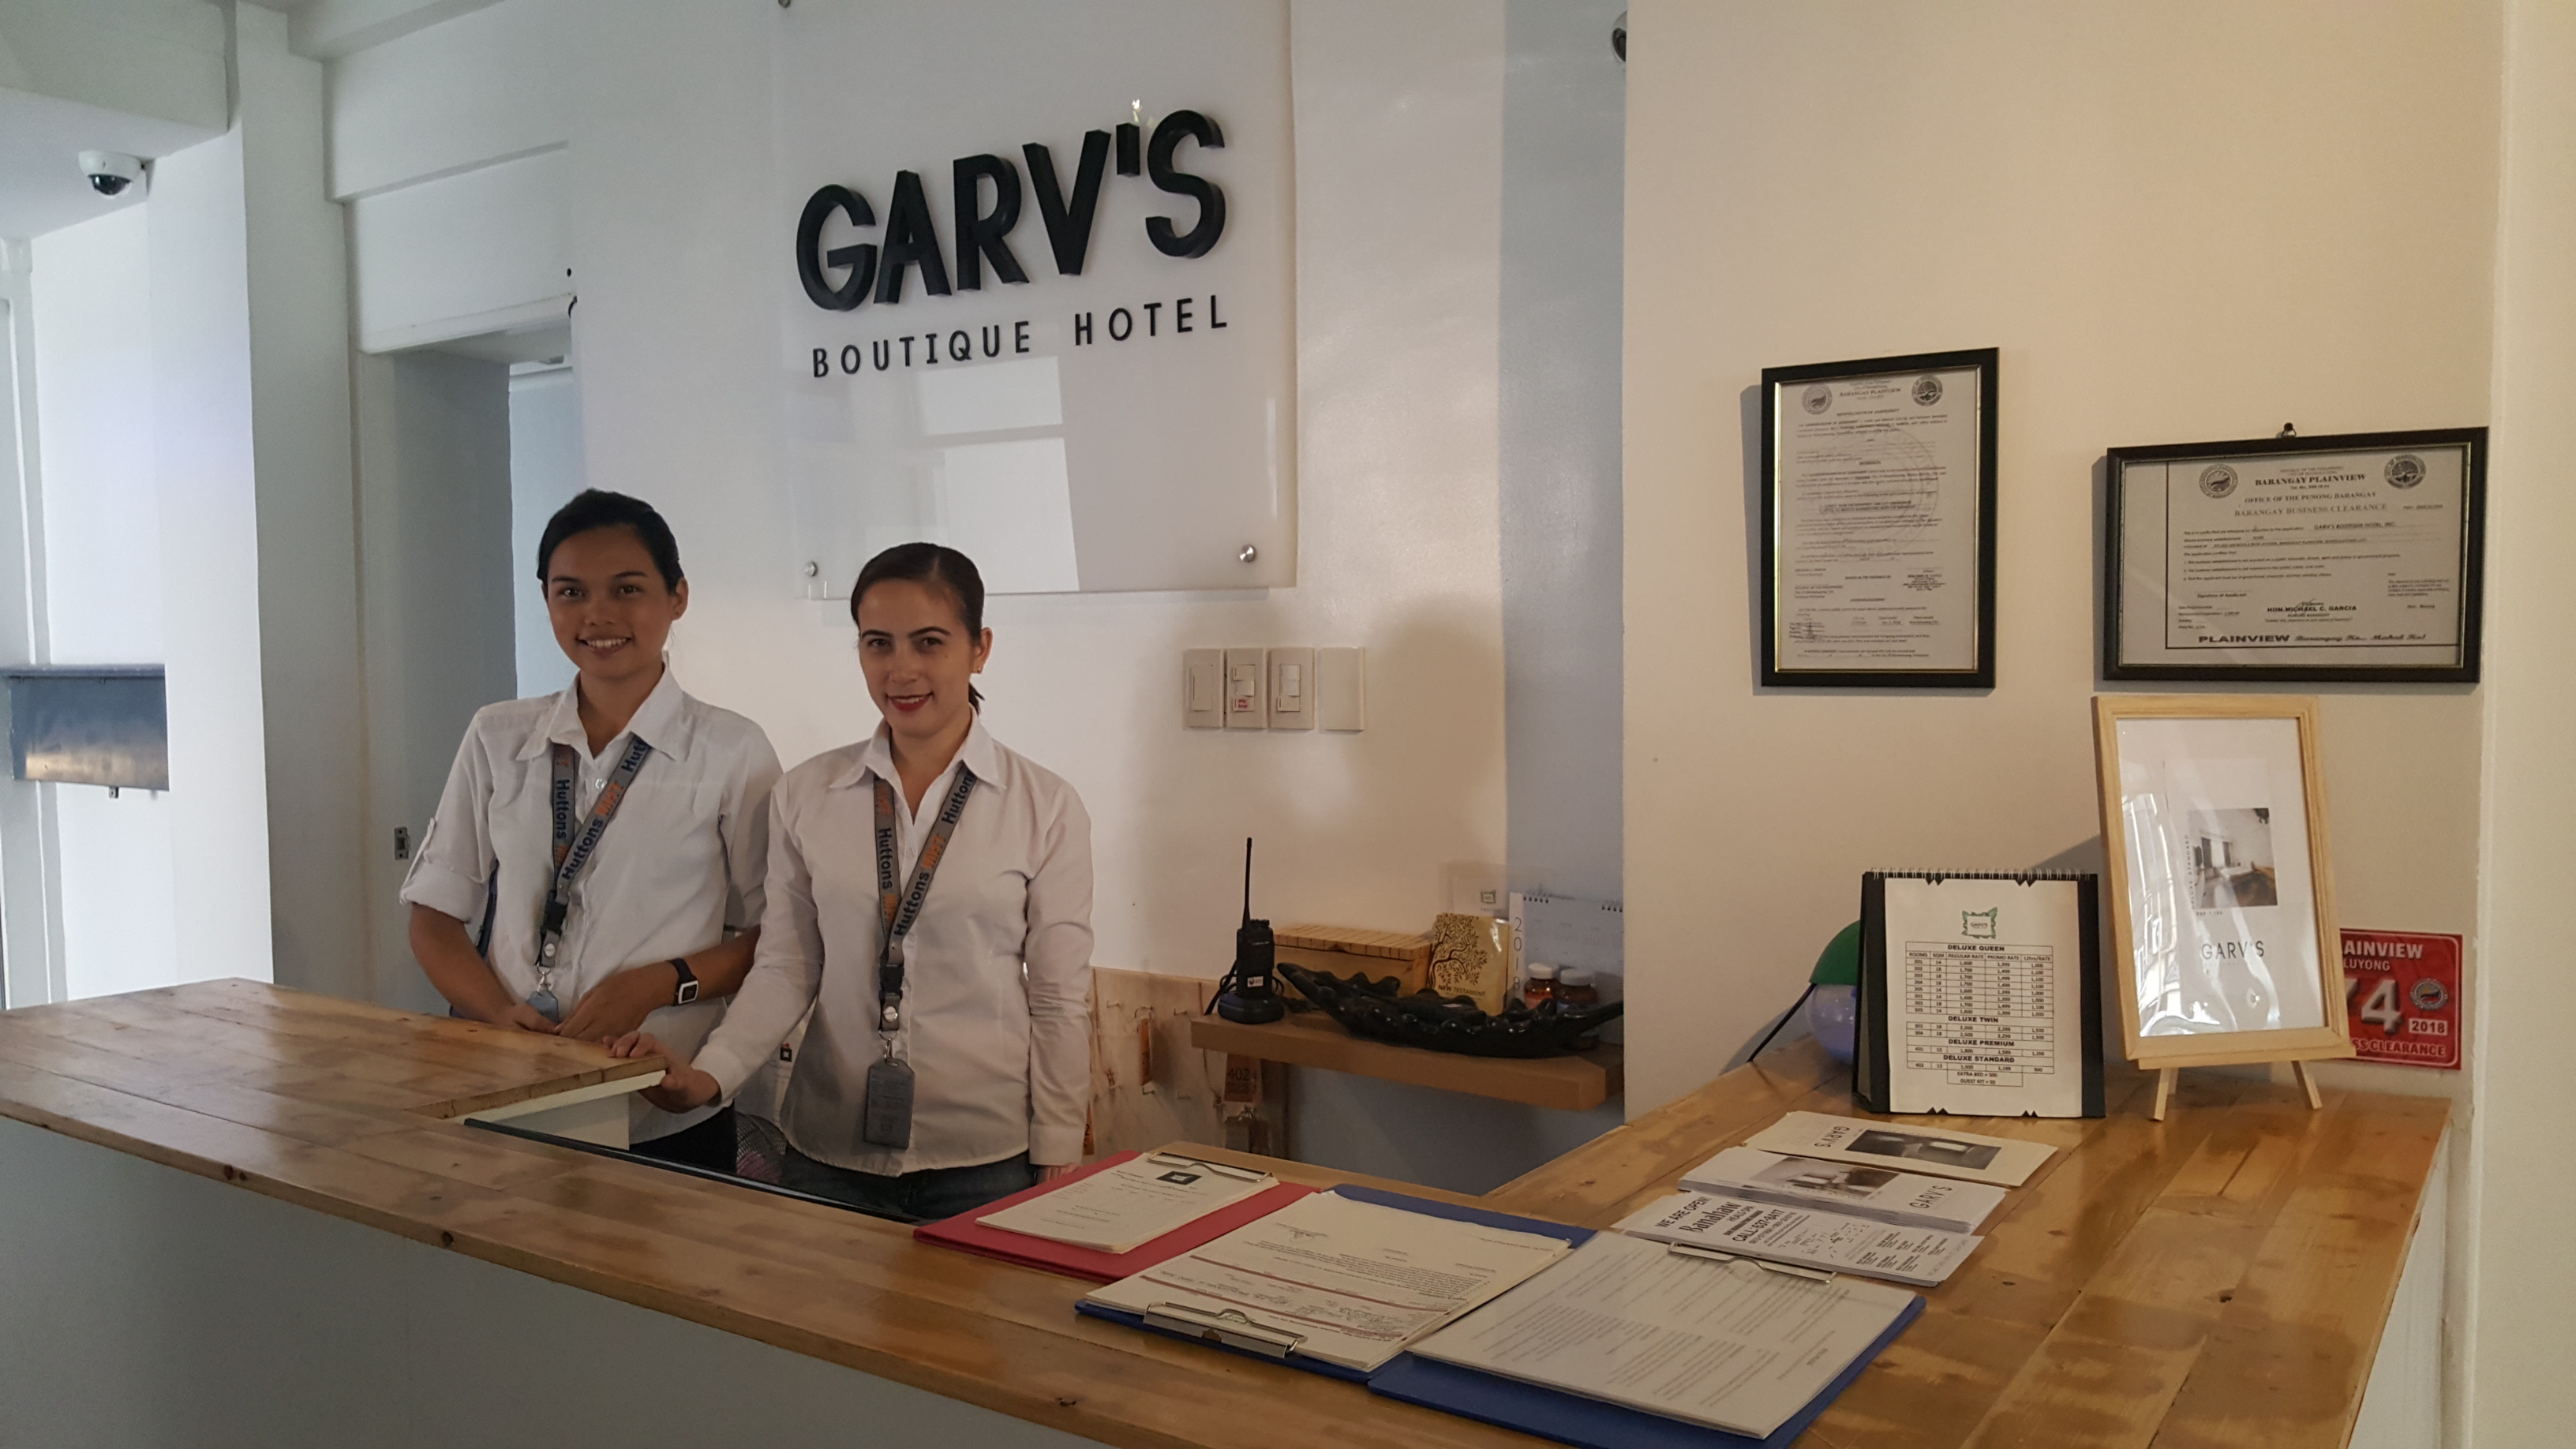 GARV'S Boutique Hotel has accommodating and attentive staff